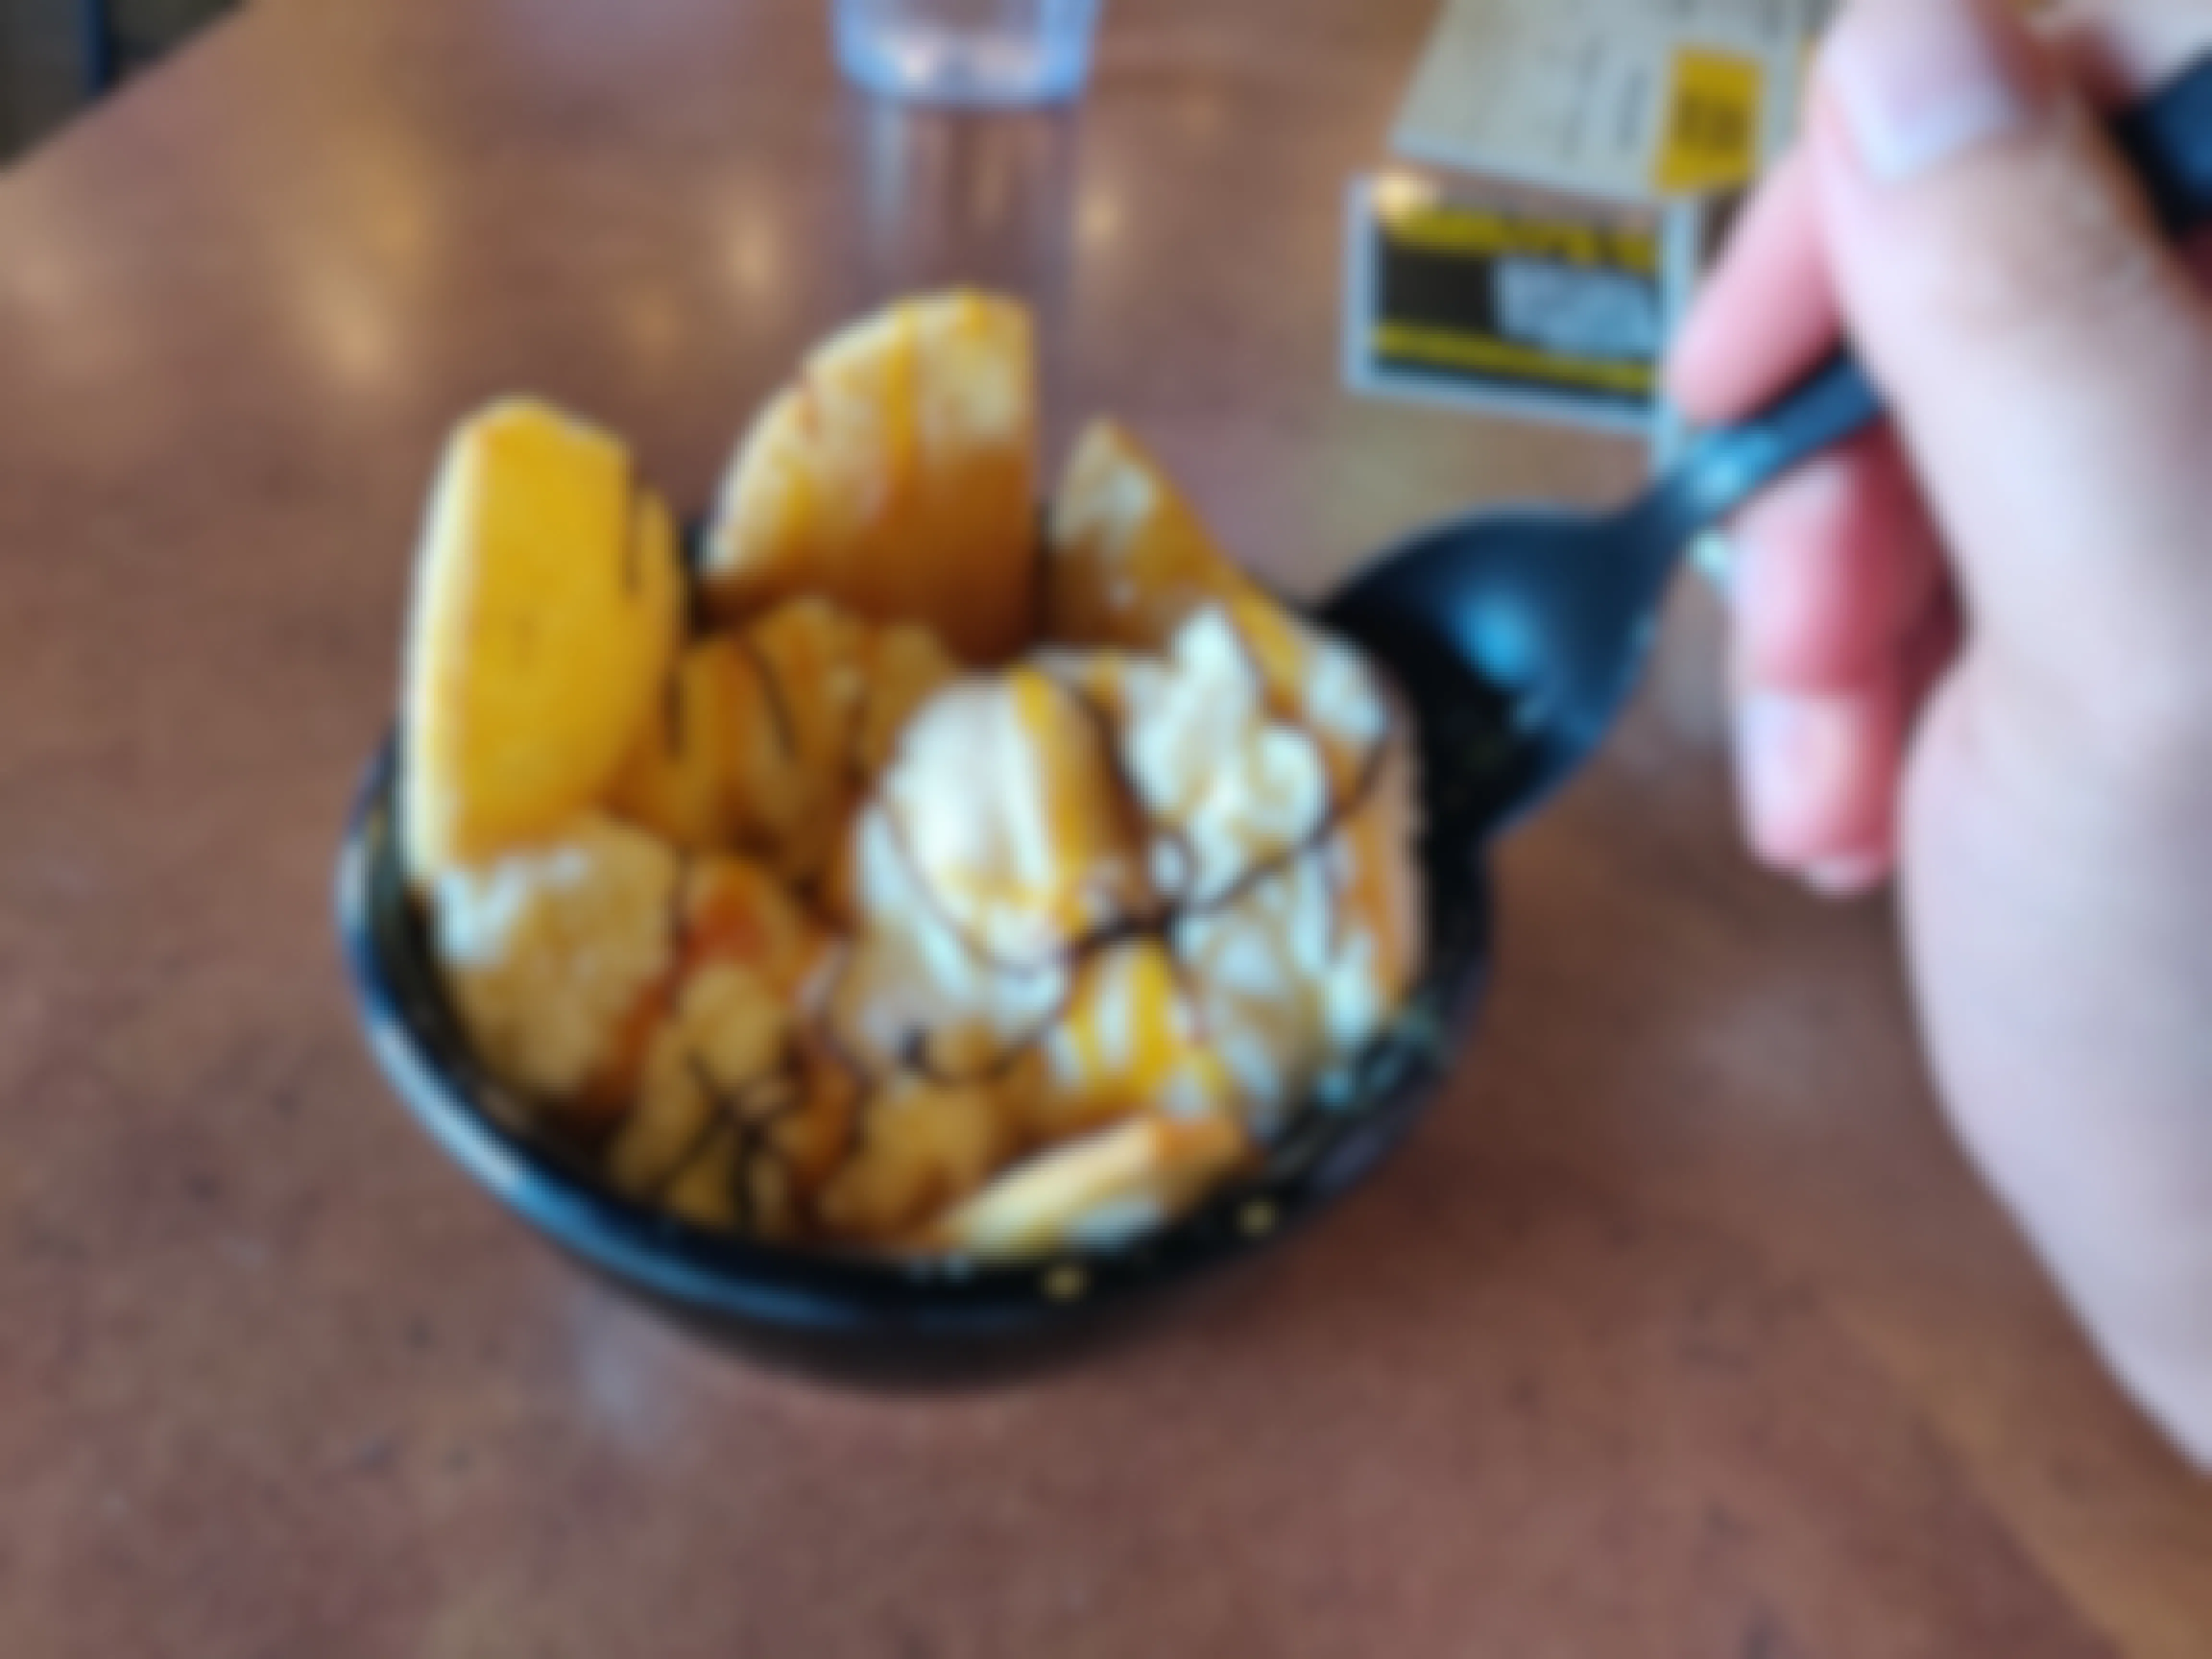 A person scooping their spoon into a bowl of Buffalo Wild Wings loaded ice cream sitting on the table.